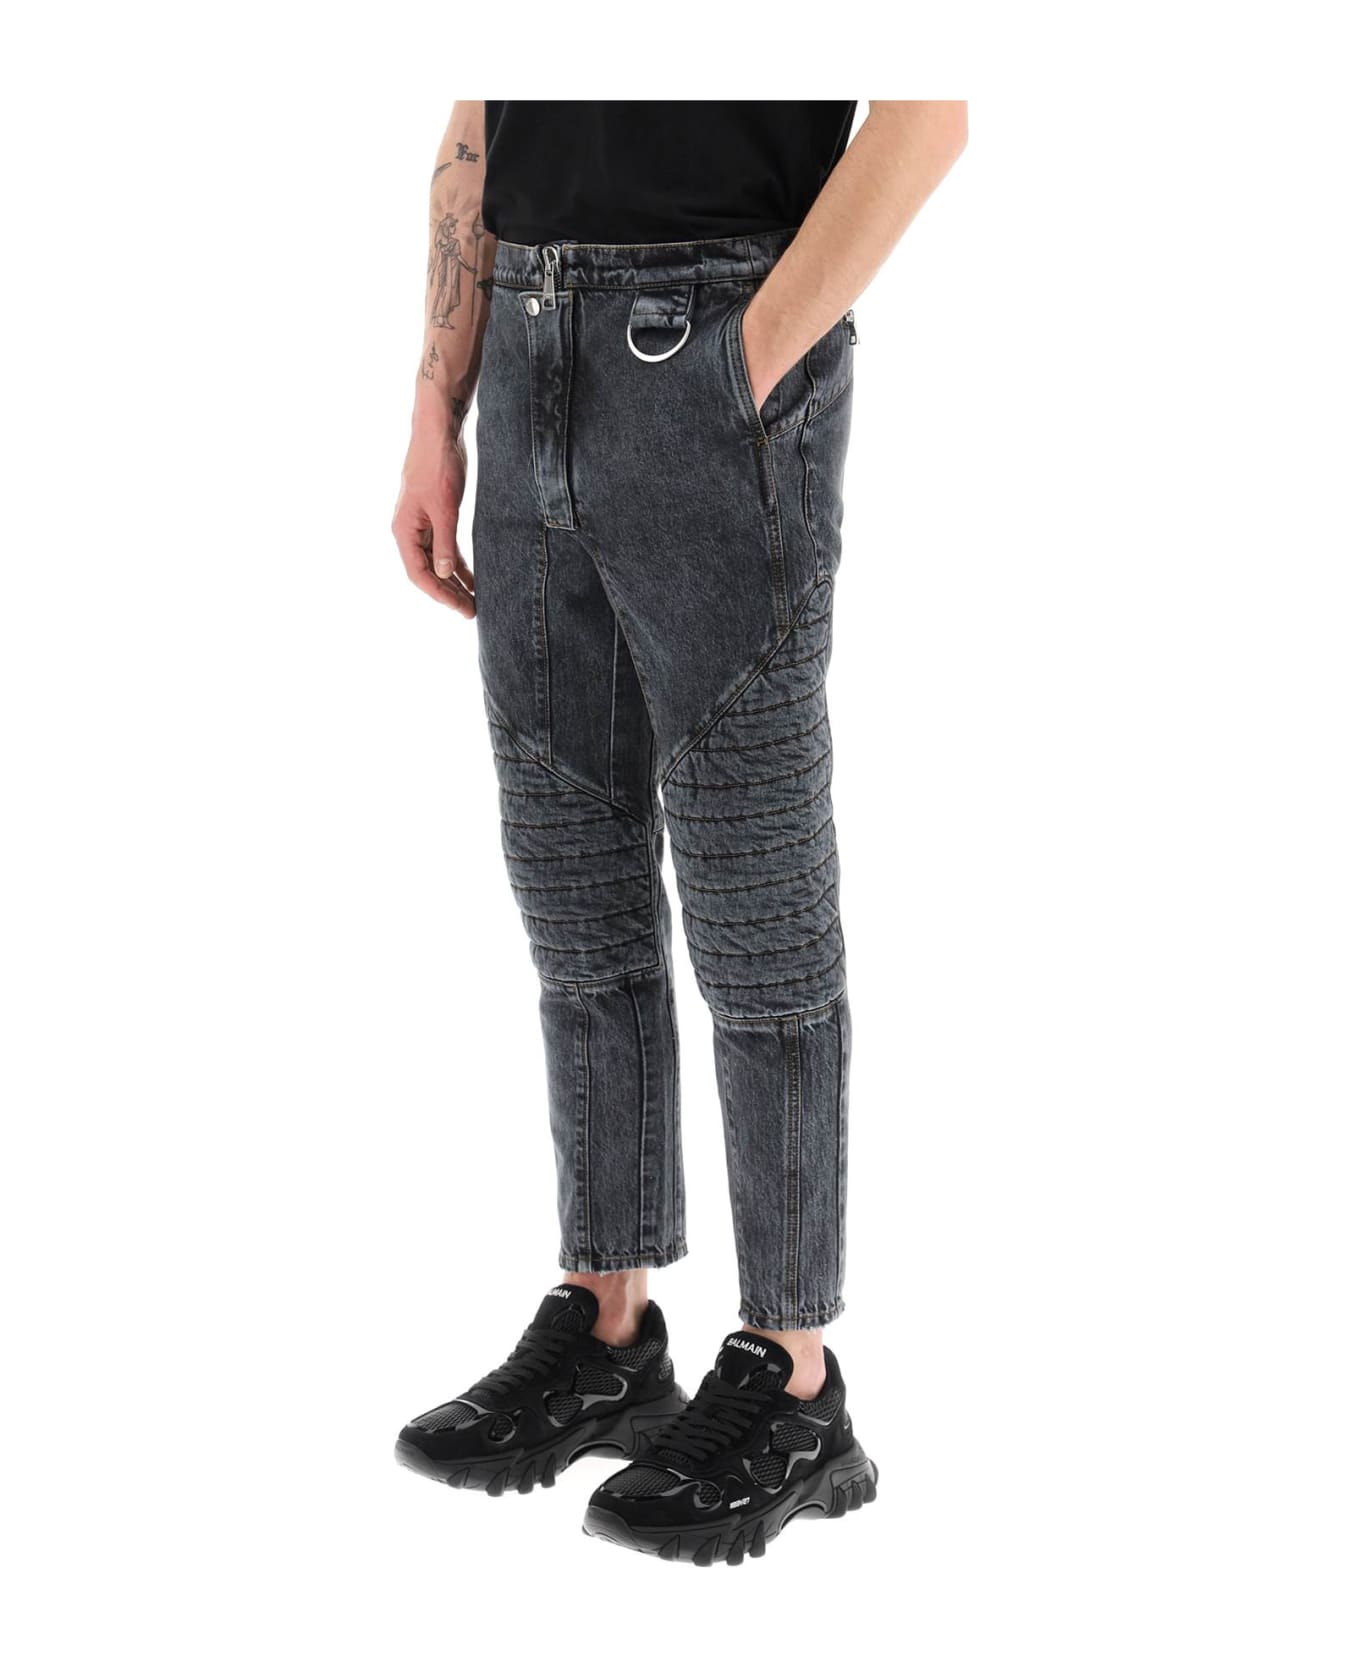 Balmain Jeans With Quilted And Padded Inserts - NOIR DELAVE (Grey)